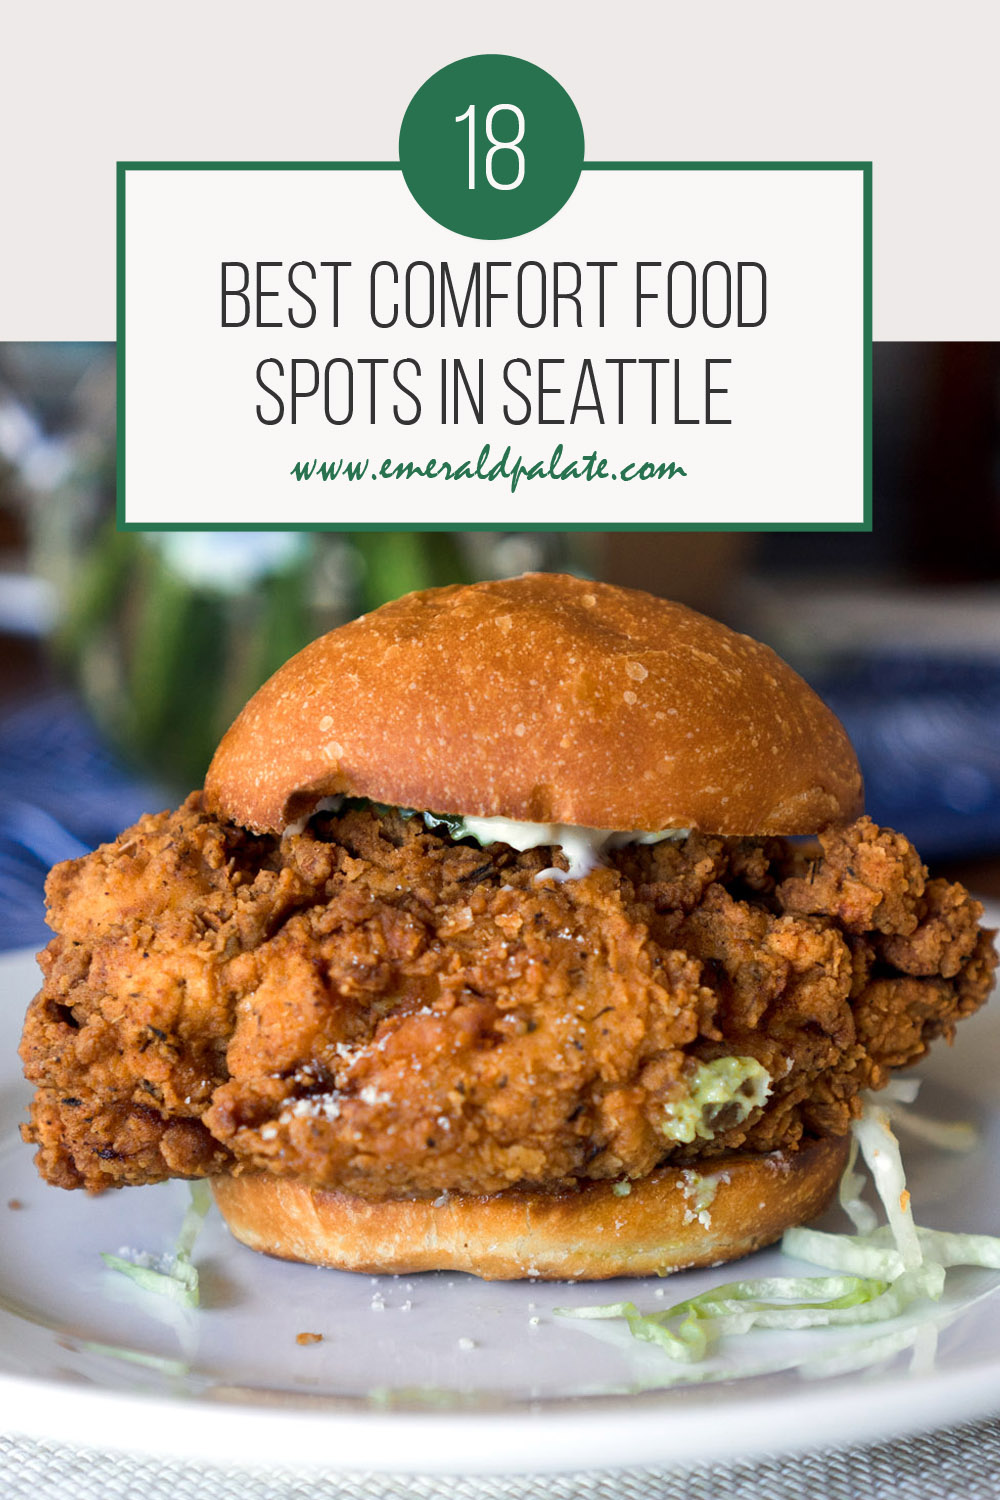 Best comfort food in Seattle. Find the best soul food, fried chicken, nachos, pizza, Chinese food and more of Seattle's best comfort food restaurants.